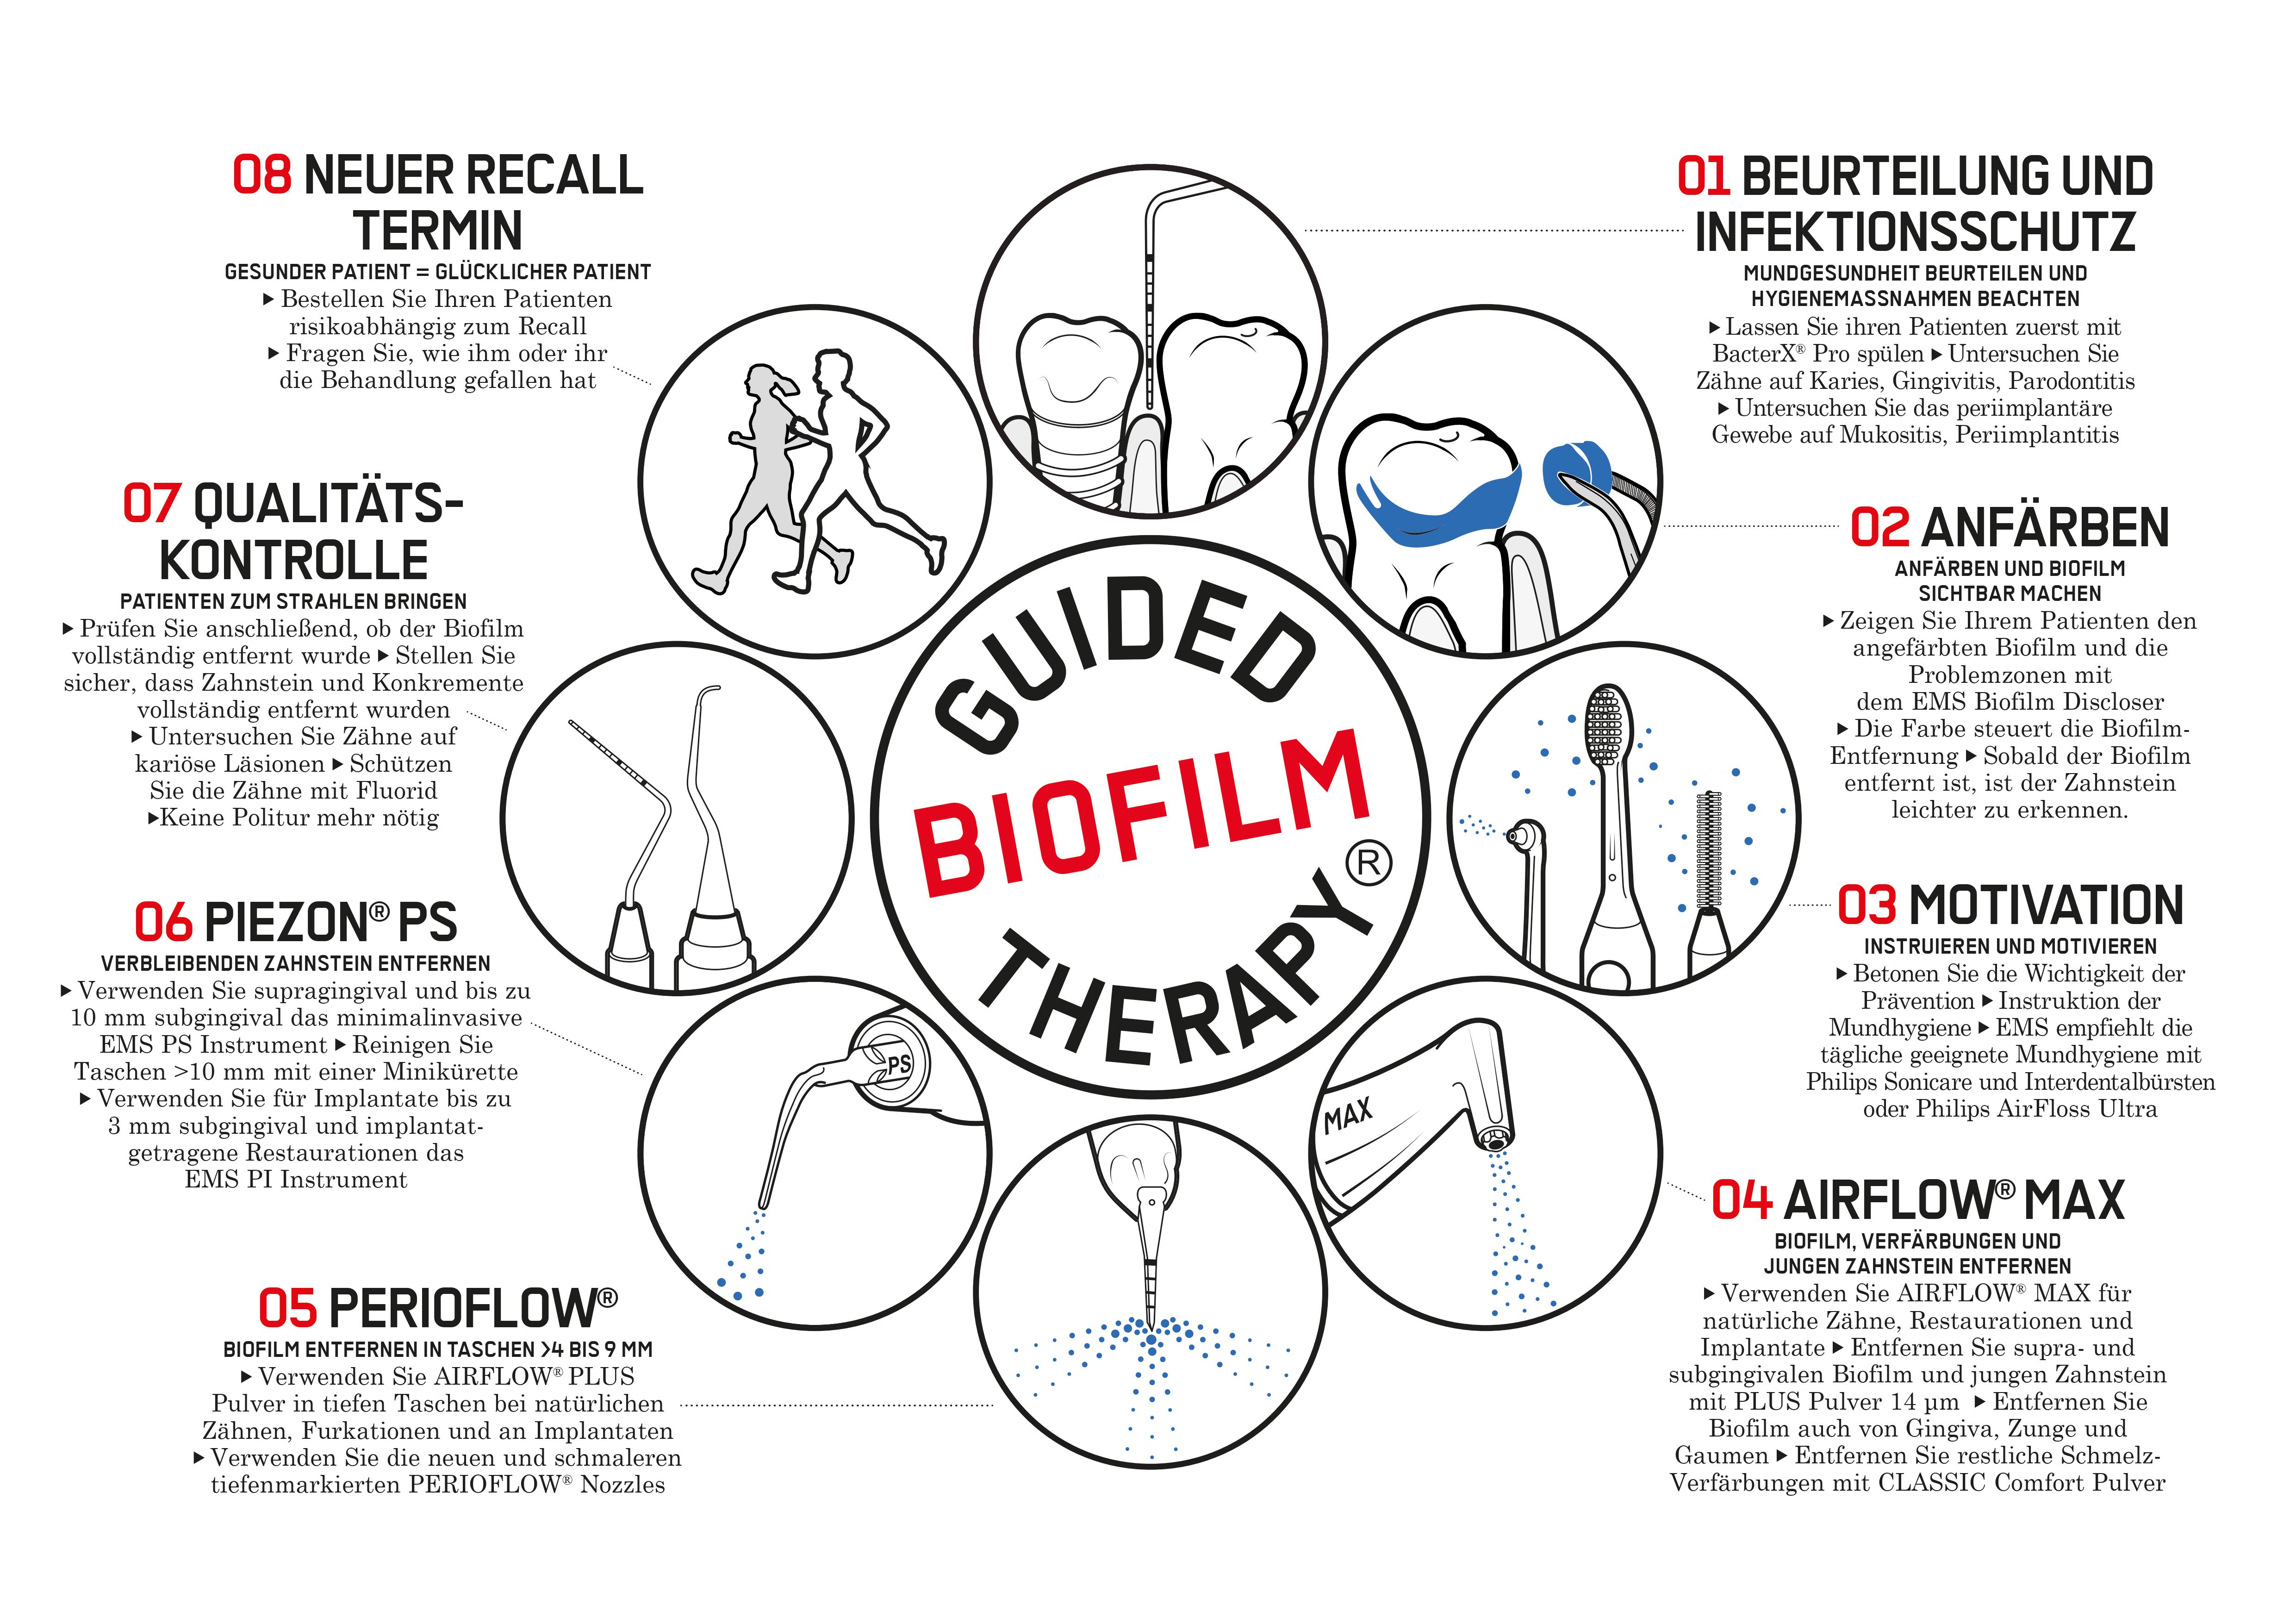 Die Guided Biofilm Therapy (GBT)